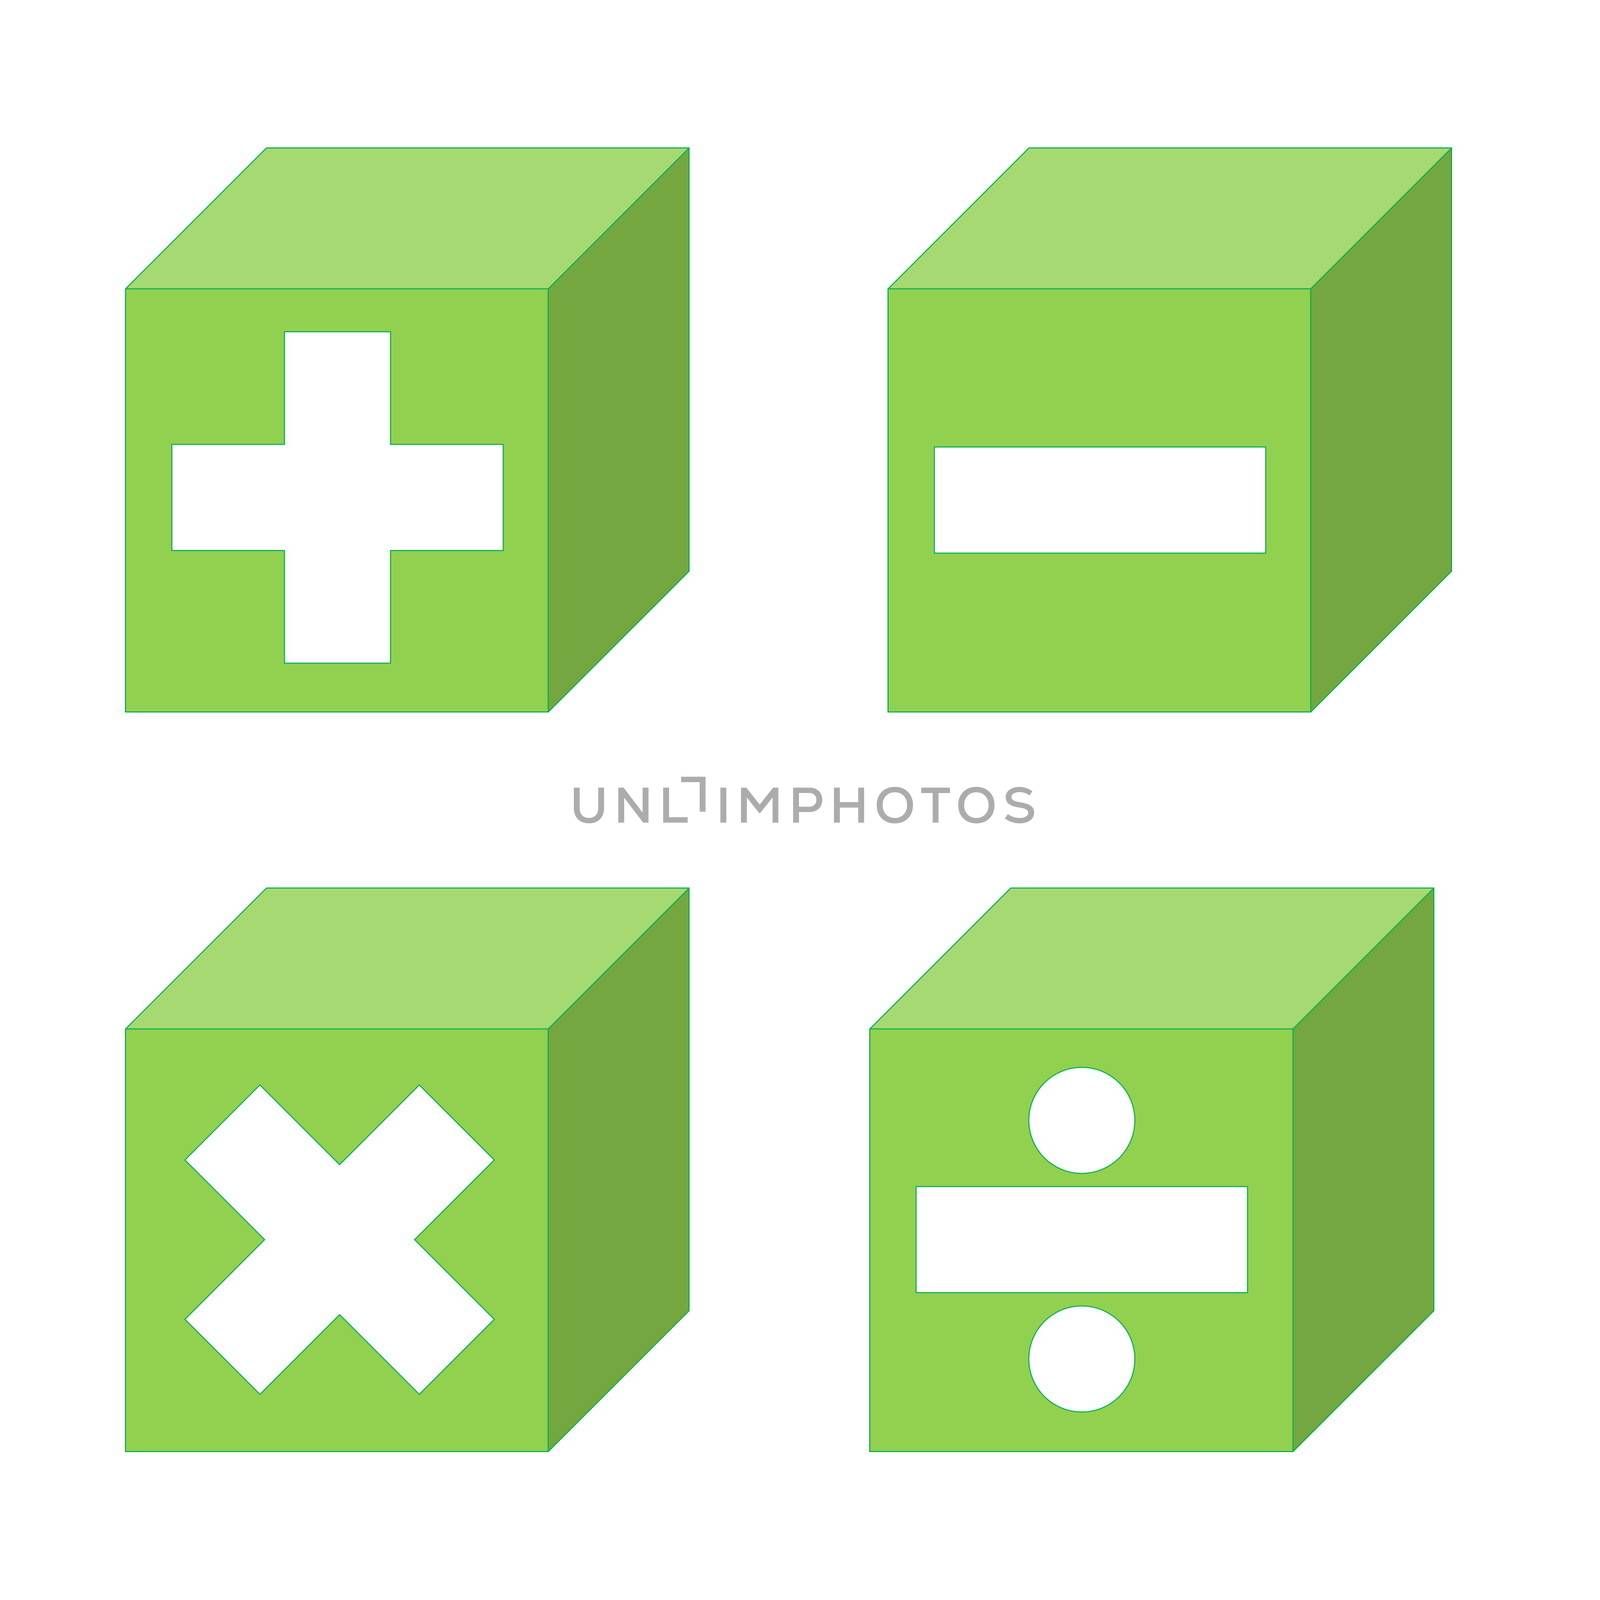 Math symbols of addition, subtraction, multiplication and division symbols into green cubes in white background